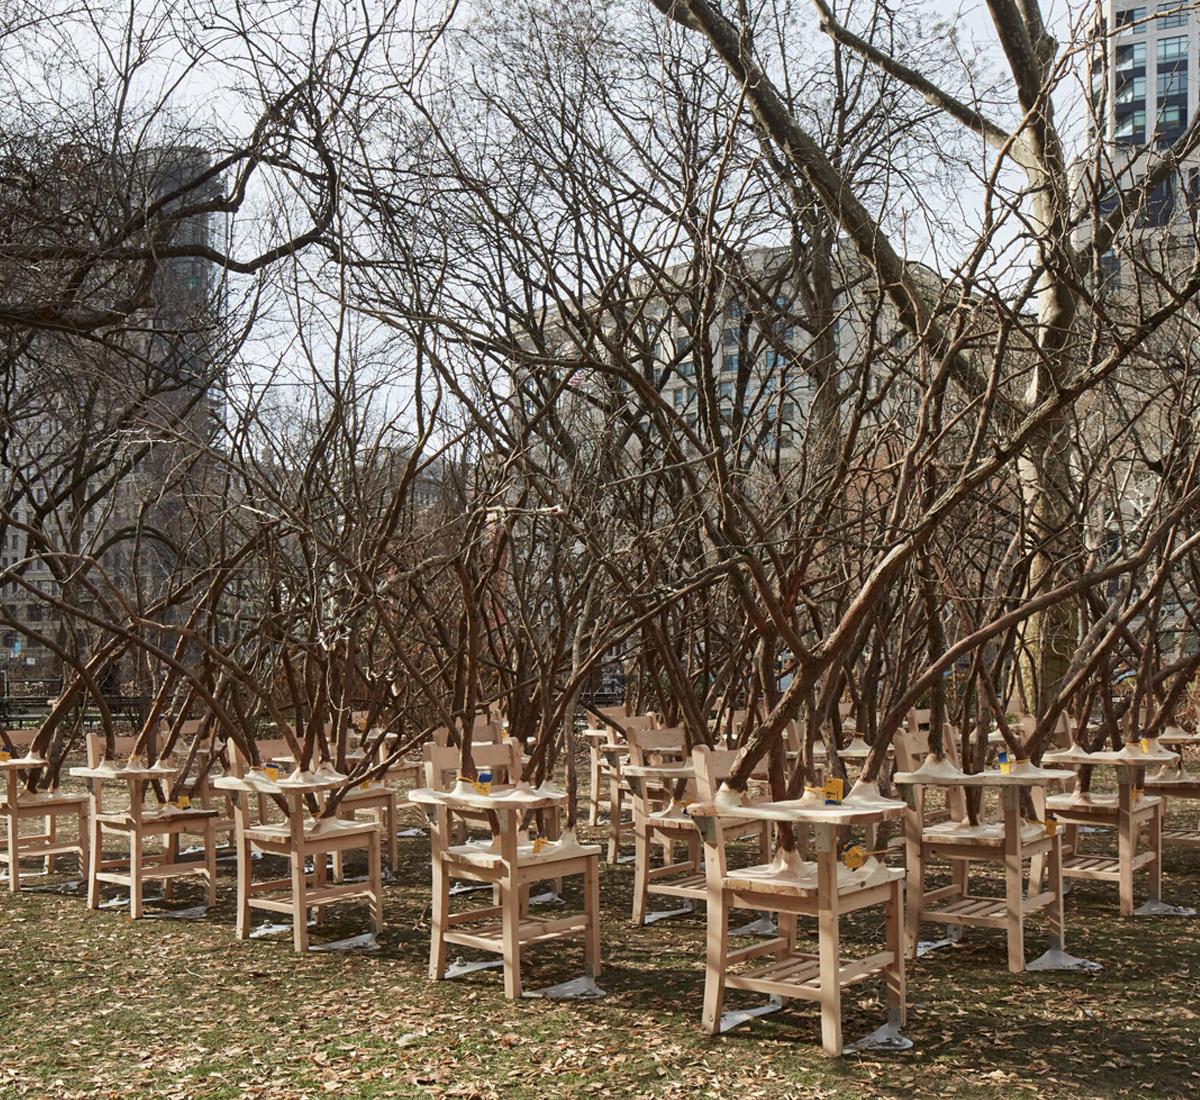 Unpainted wooden school desks with trees protruding from the top.